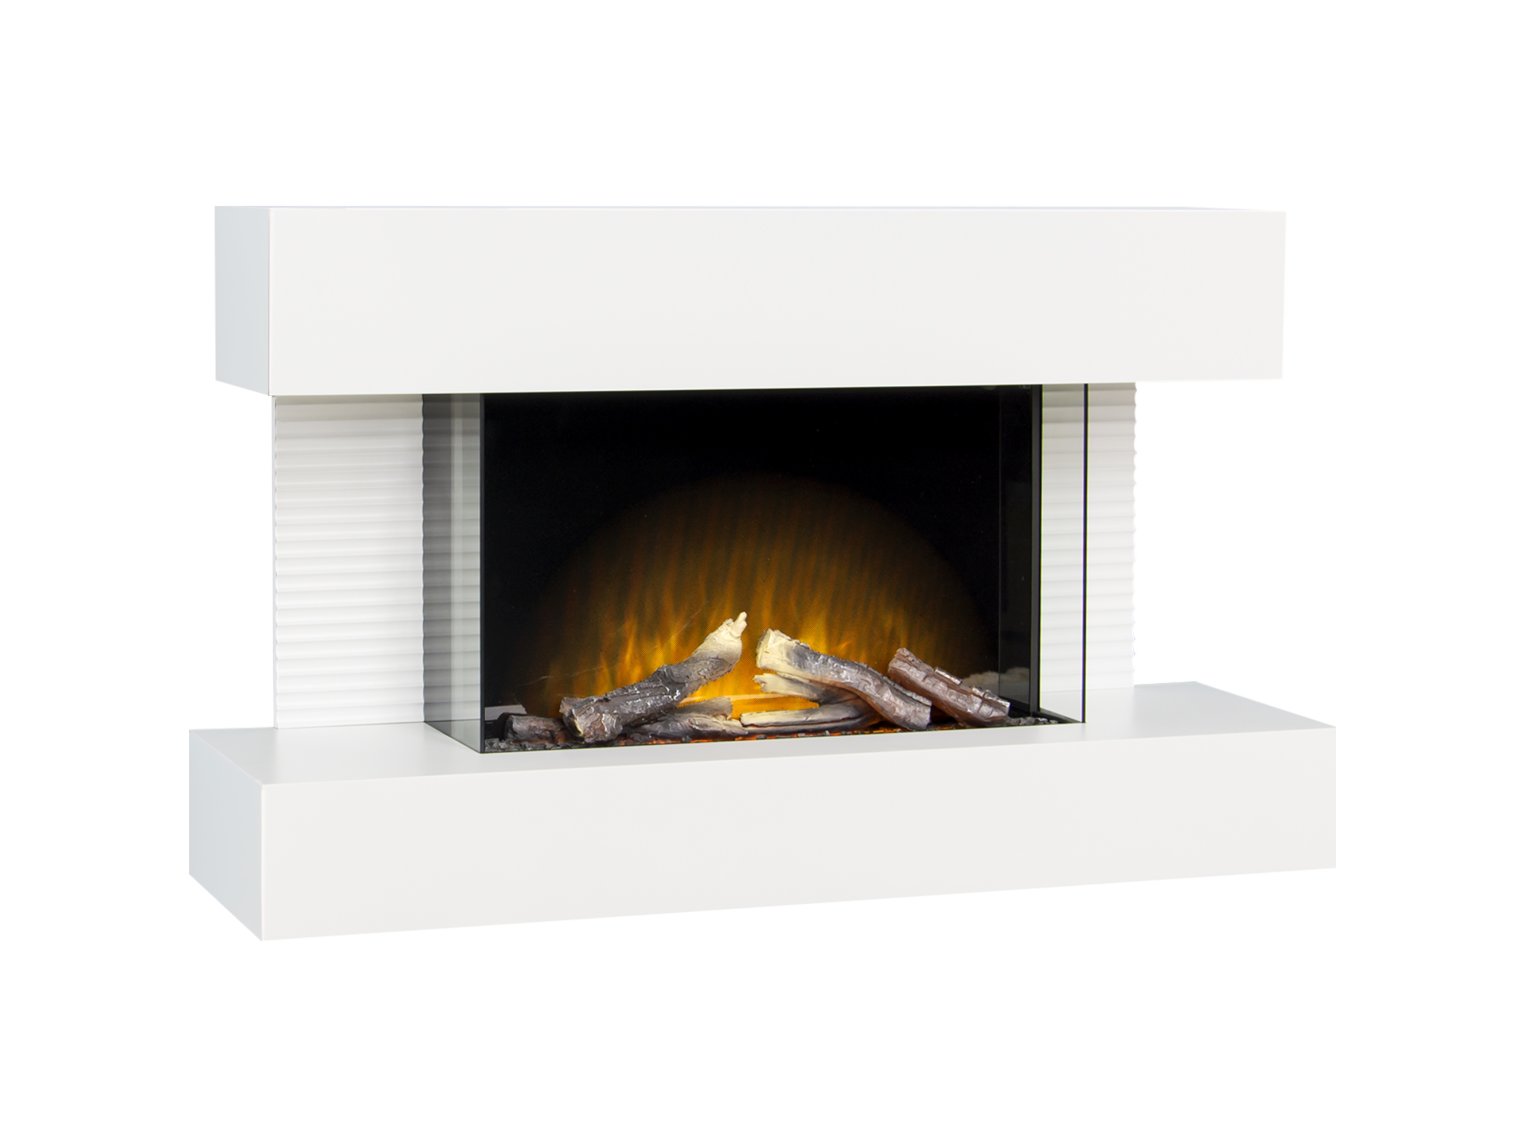 Adam Altair Wall Mounted Electric Fire Suite + Downlights & Remote Control Pure White